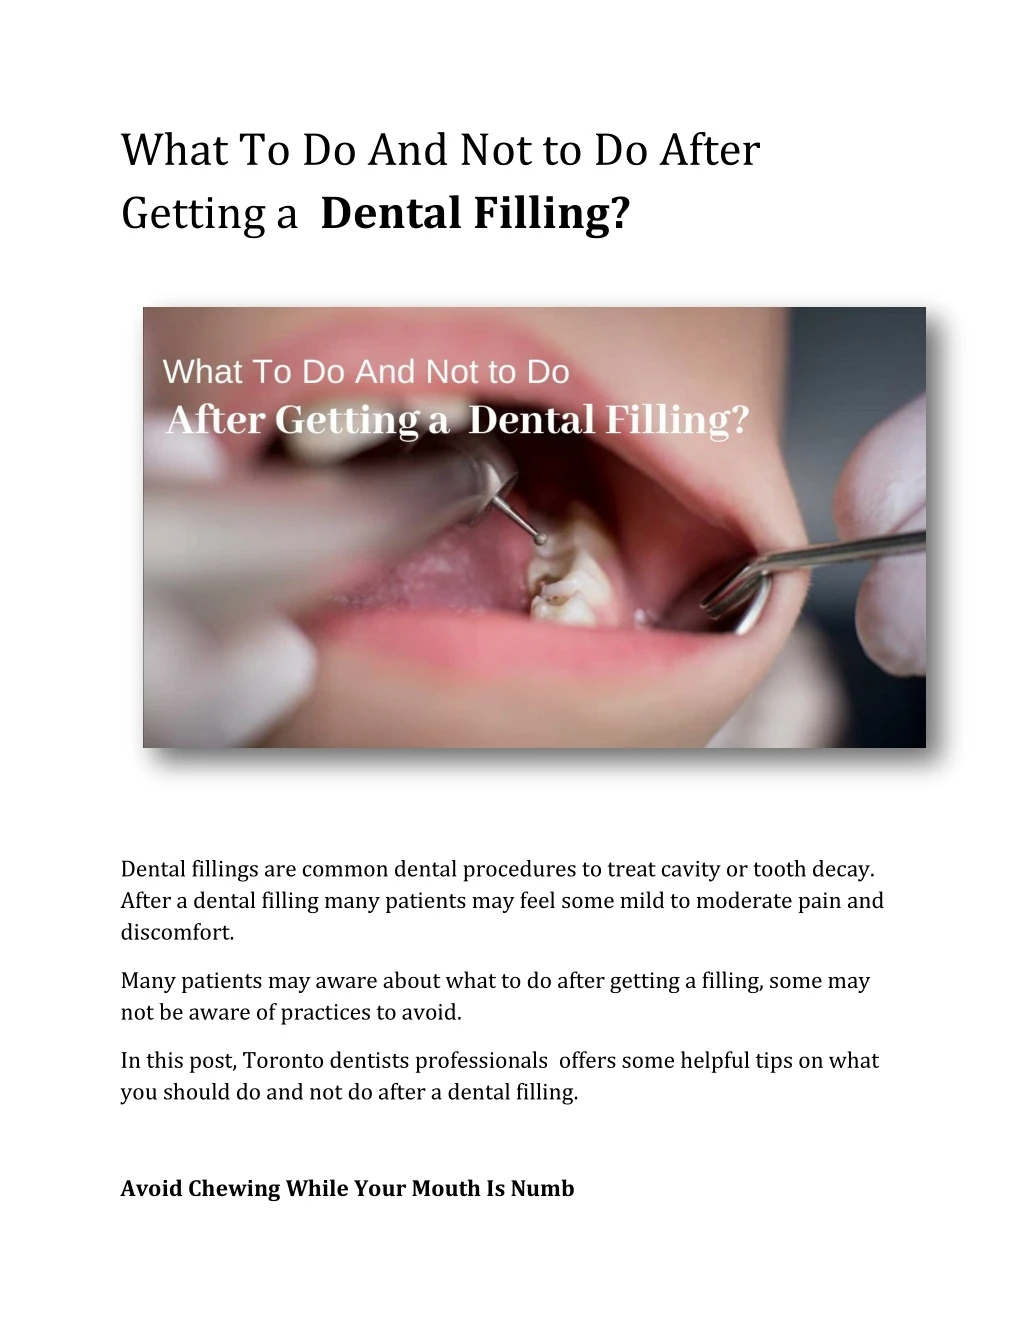 what to do and not to do after getting a dental